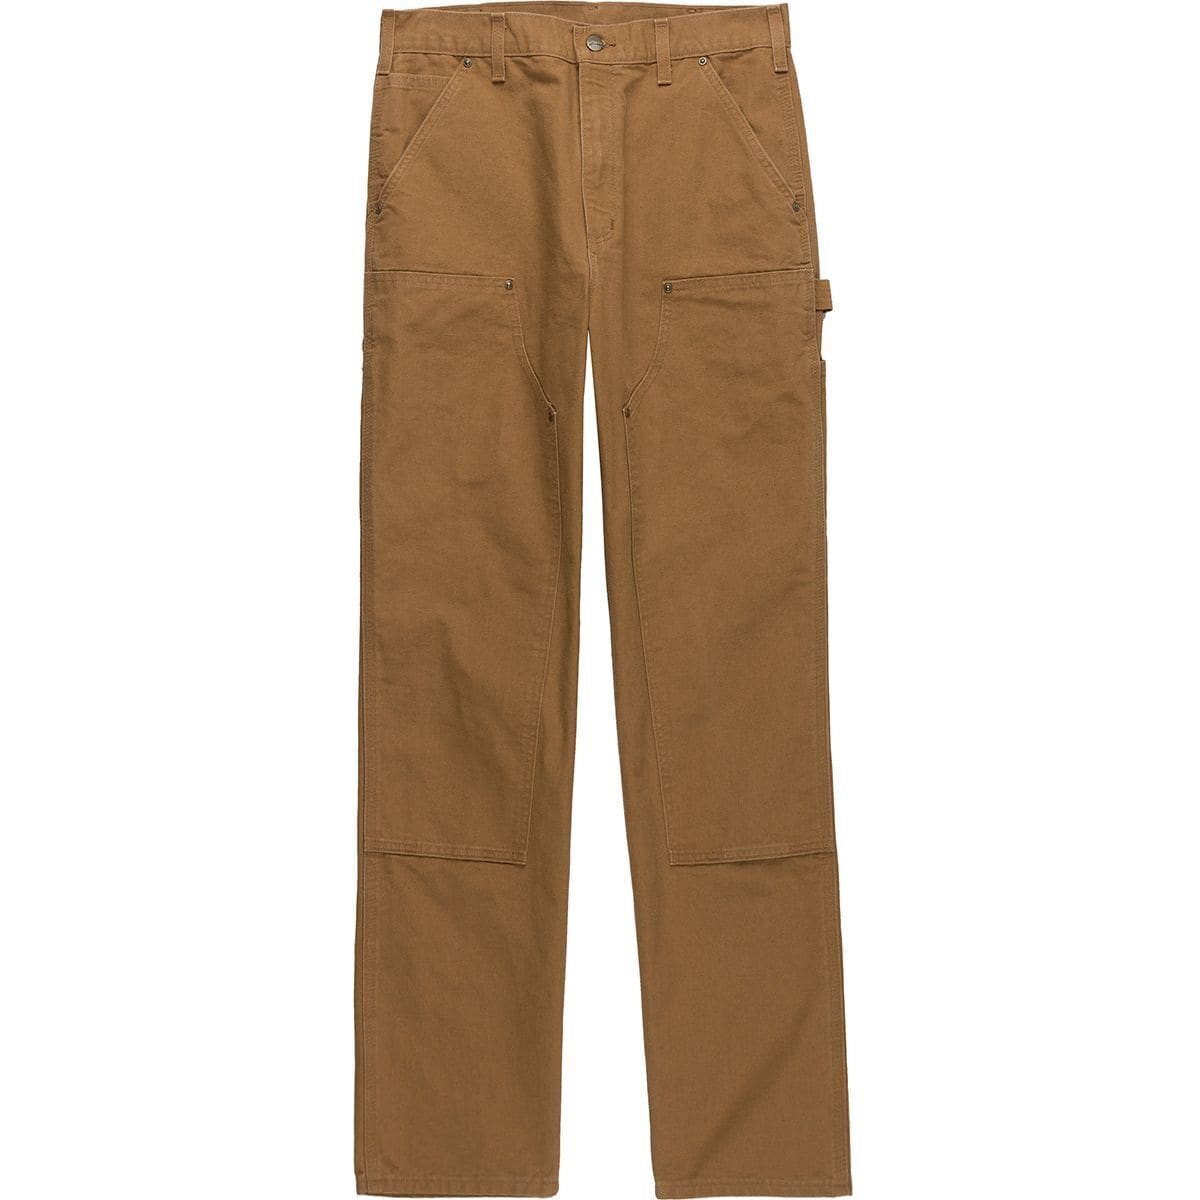 Carhartt Washed-Duck Double-Front Work Dungaree Pant - Men's